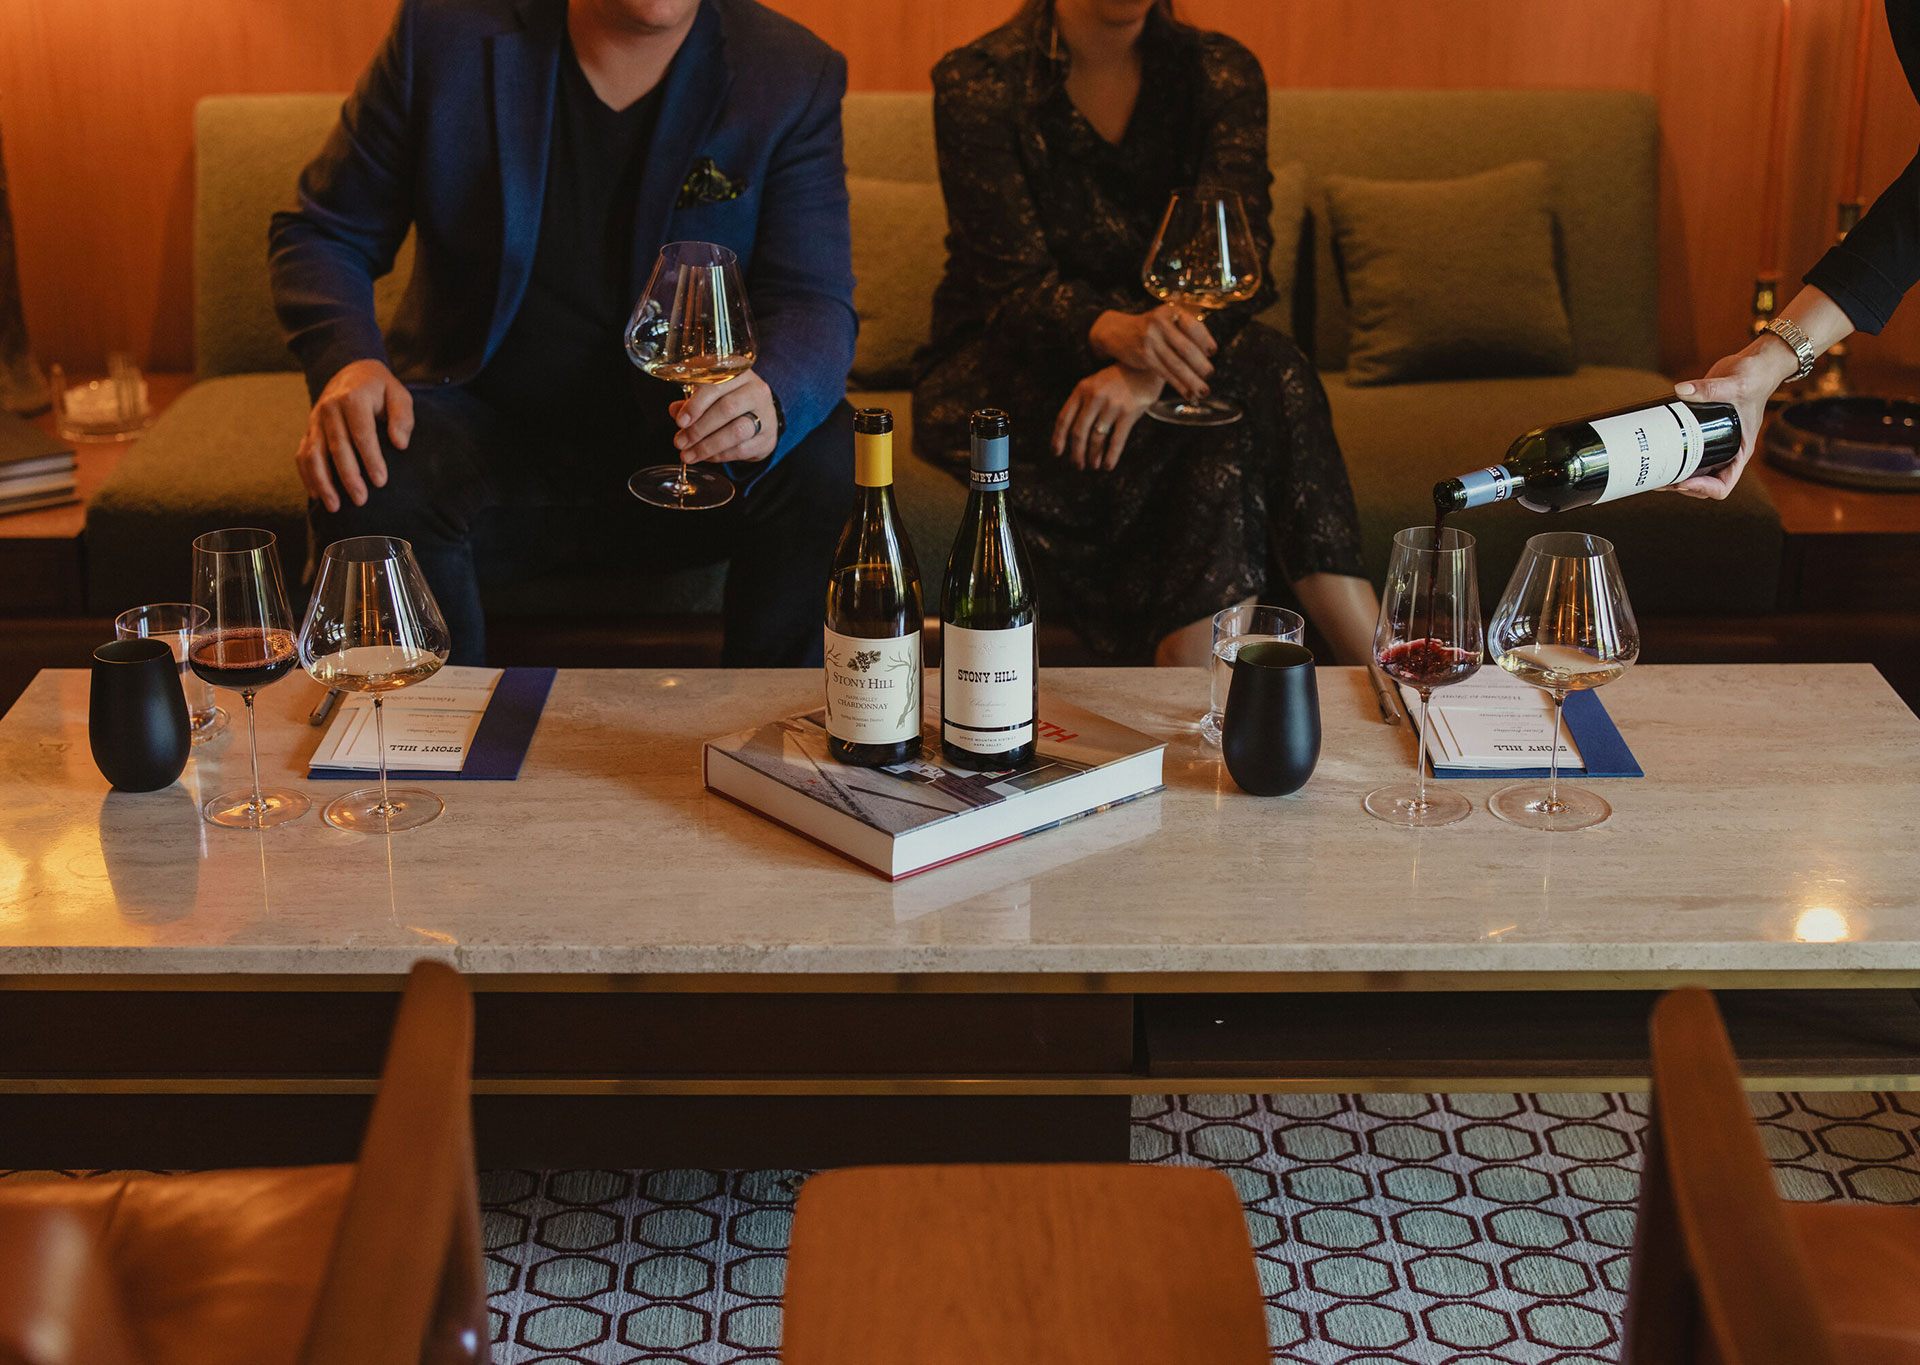 A couple enjoying a tasting at the Stony Hill Residence. Wine glasses filled with wine and bottles of Stony Hill on a coffee table.